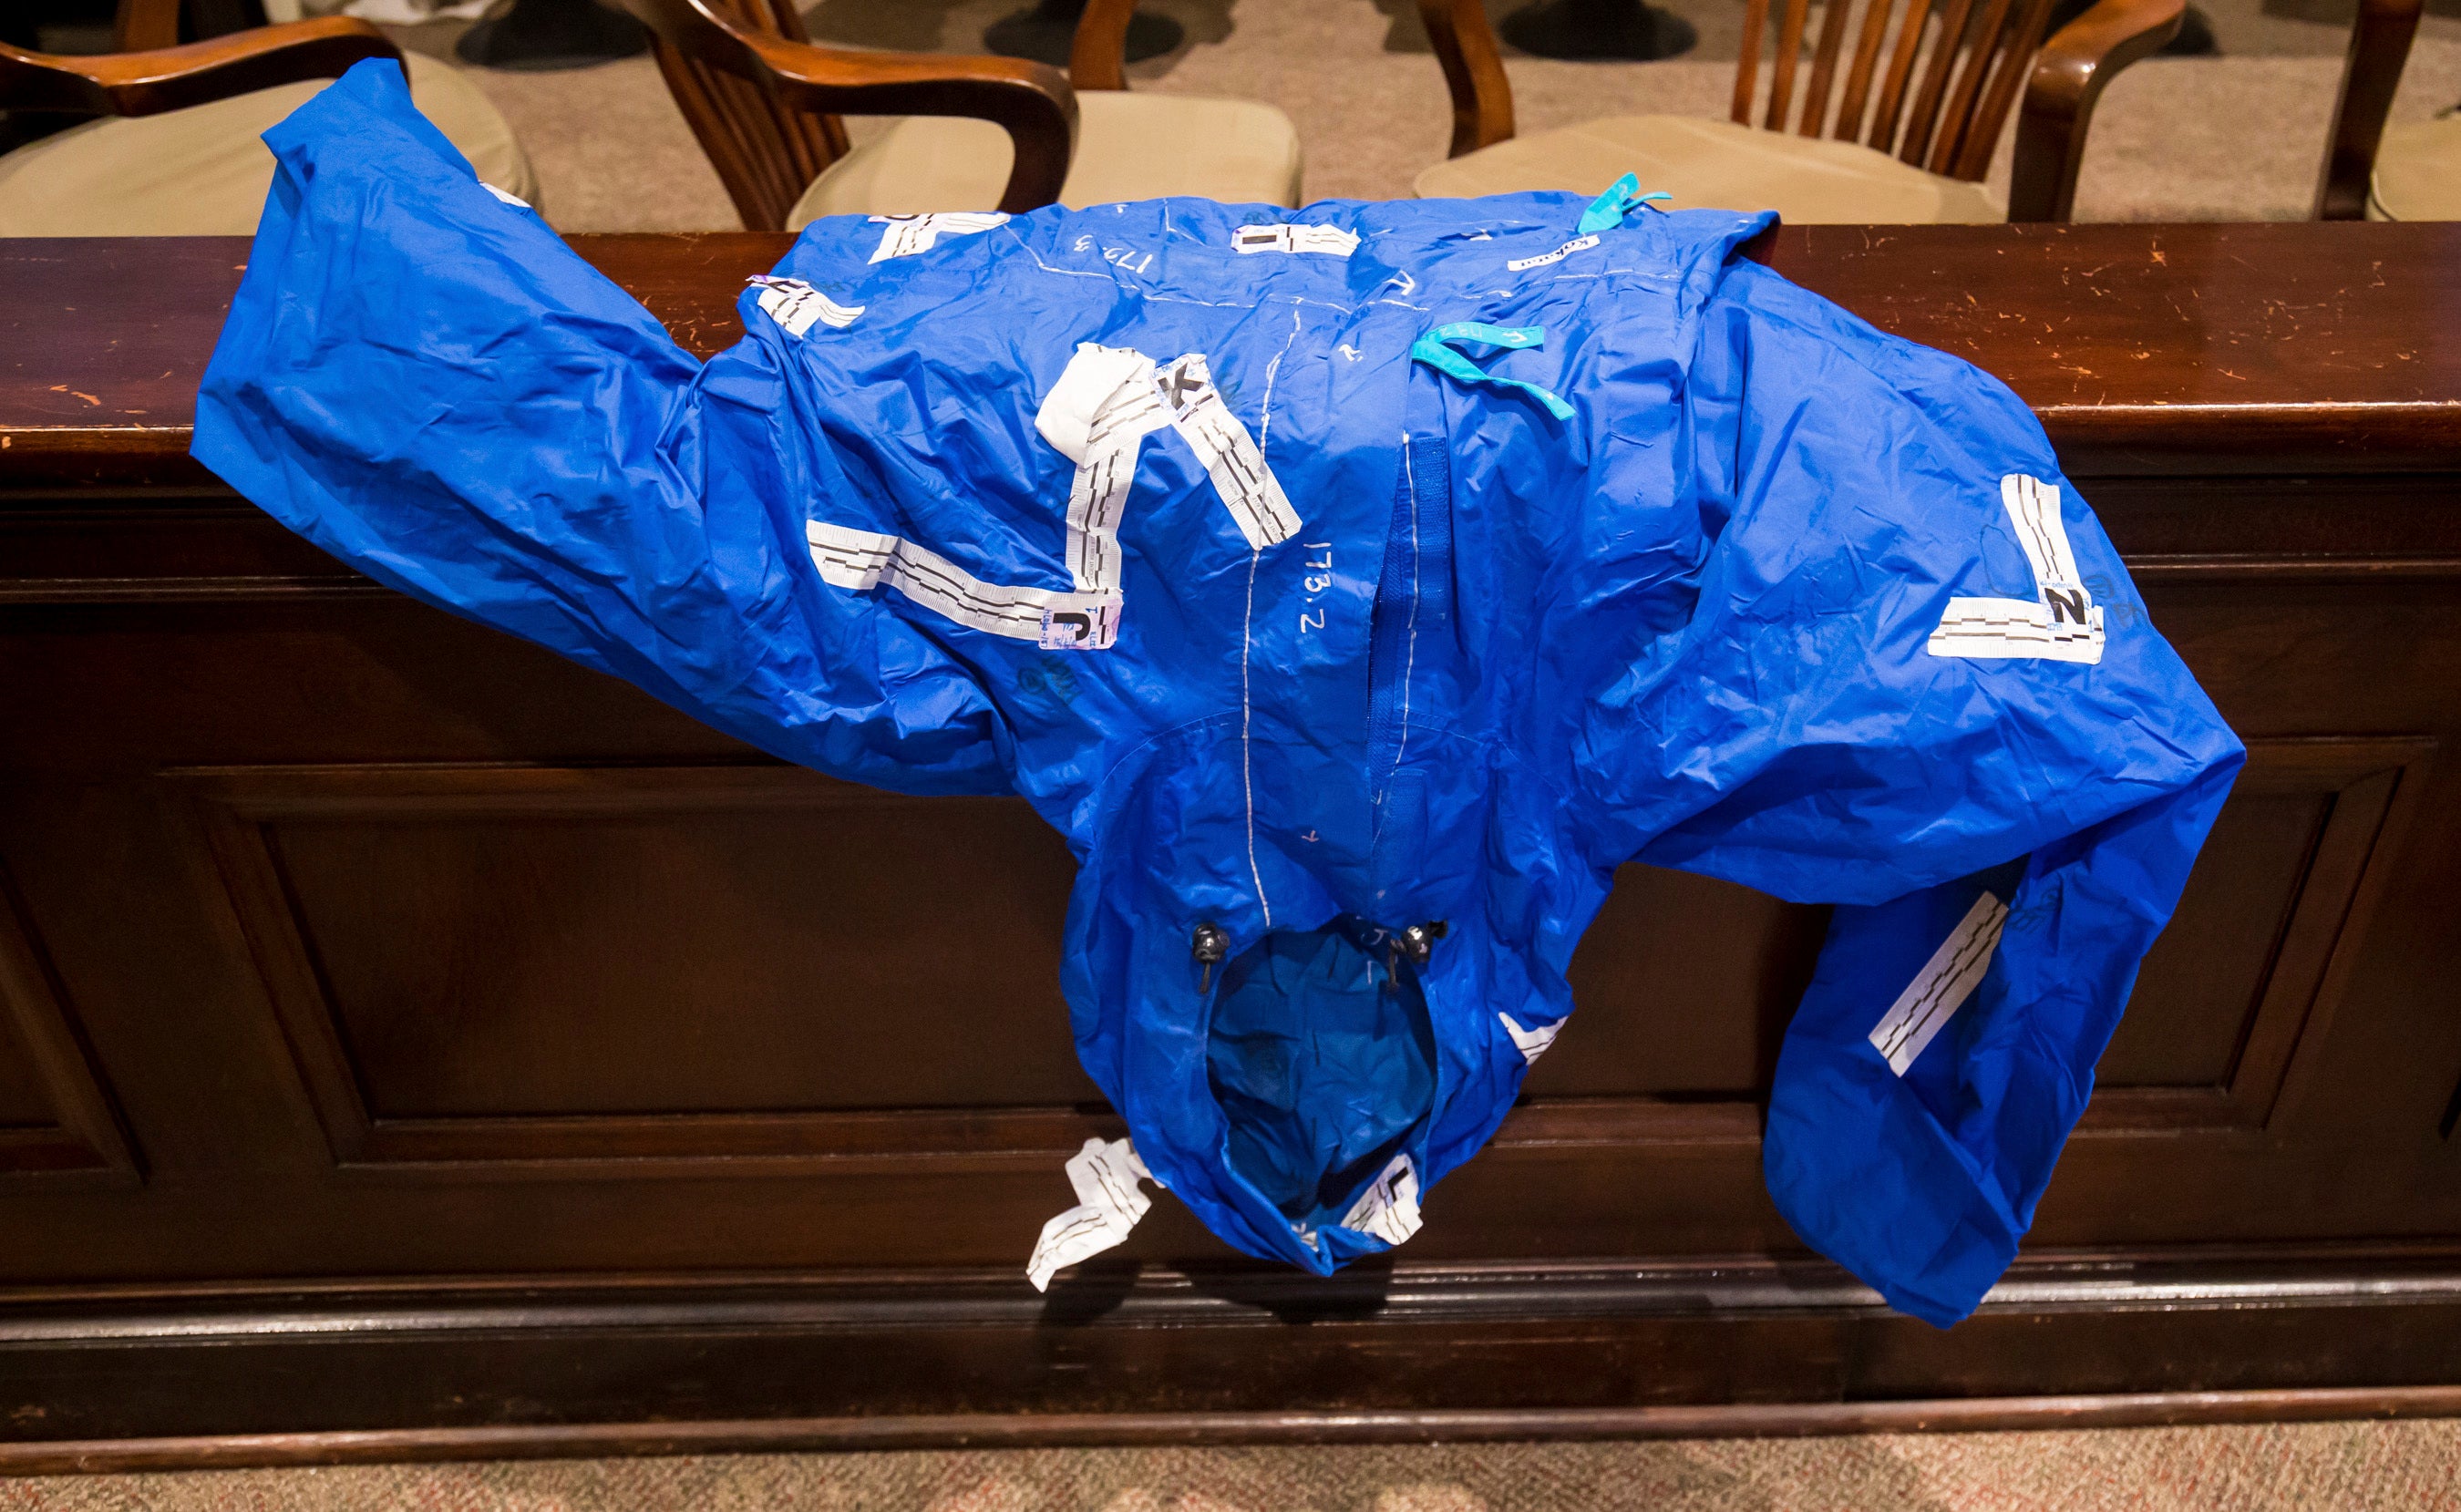 The blue raincoat which was covered in gunshot residue